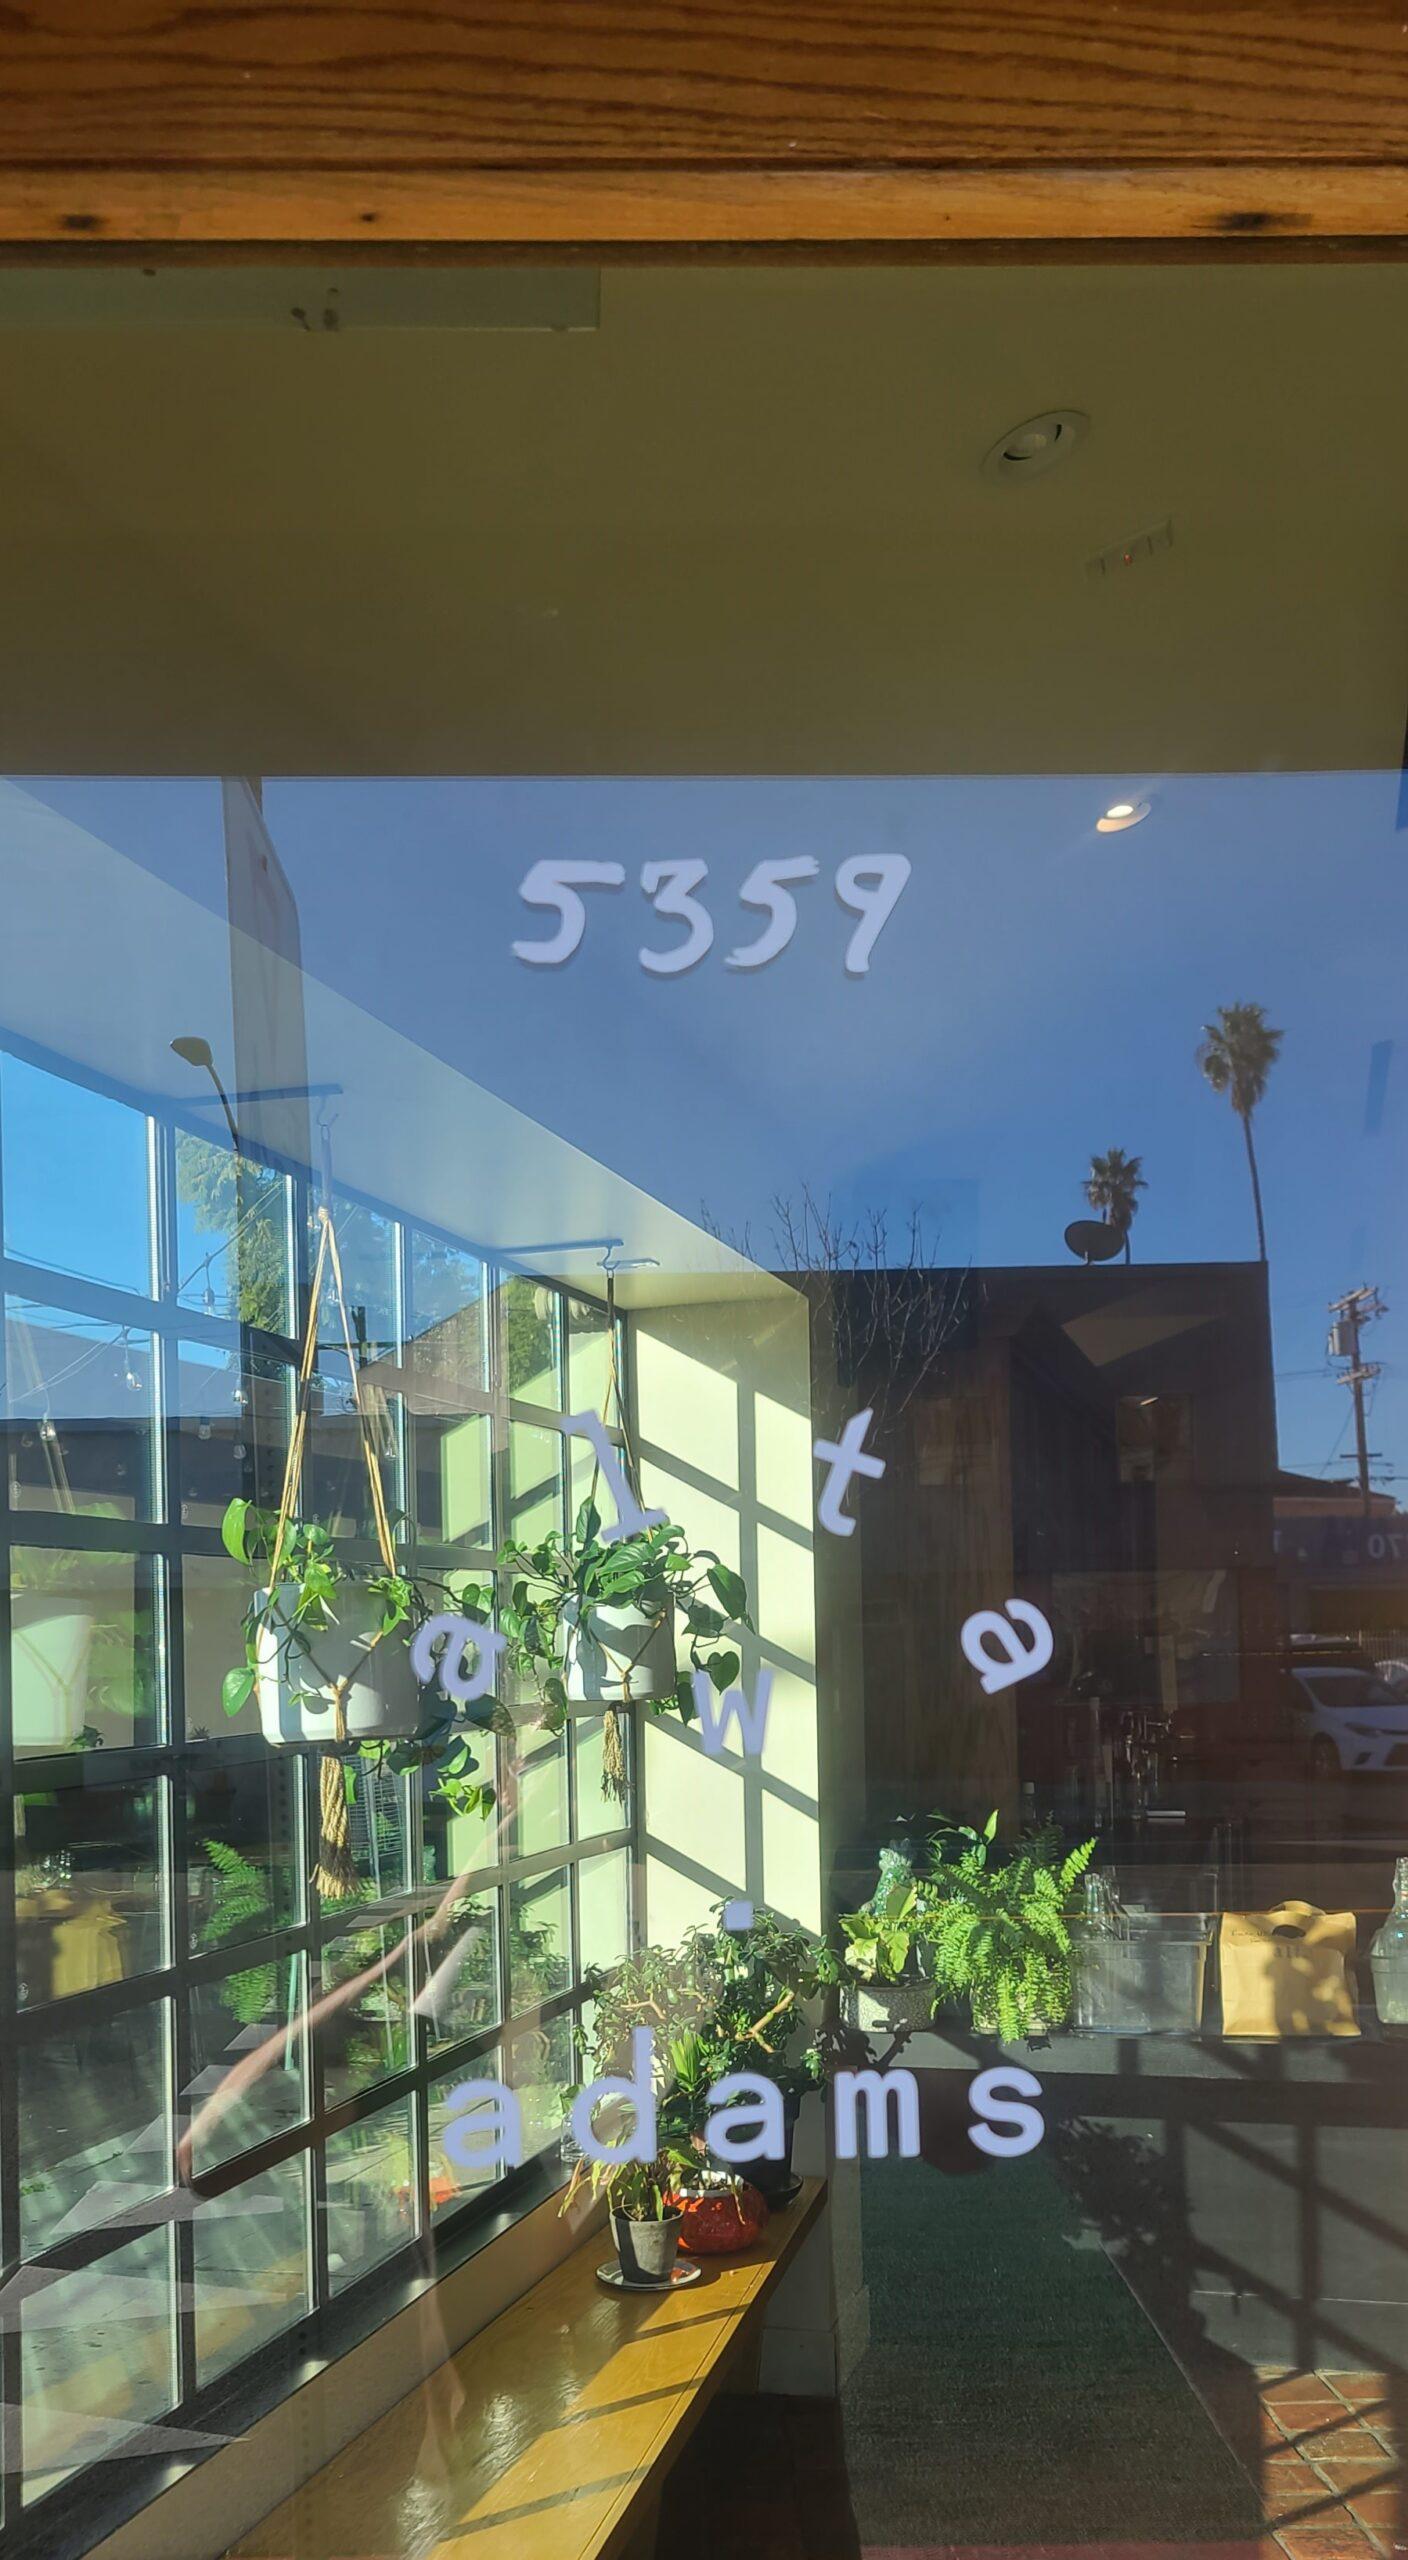 This is the window vinyl sign for Alta Adams in Los Angeles, representing the brand while giving passersby a good glimpse of the people inside enjoying their meals.